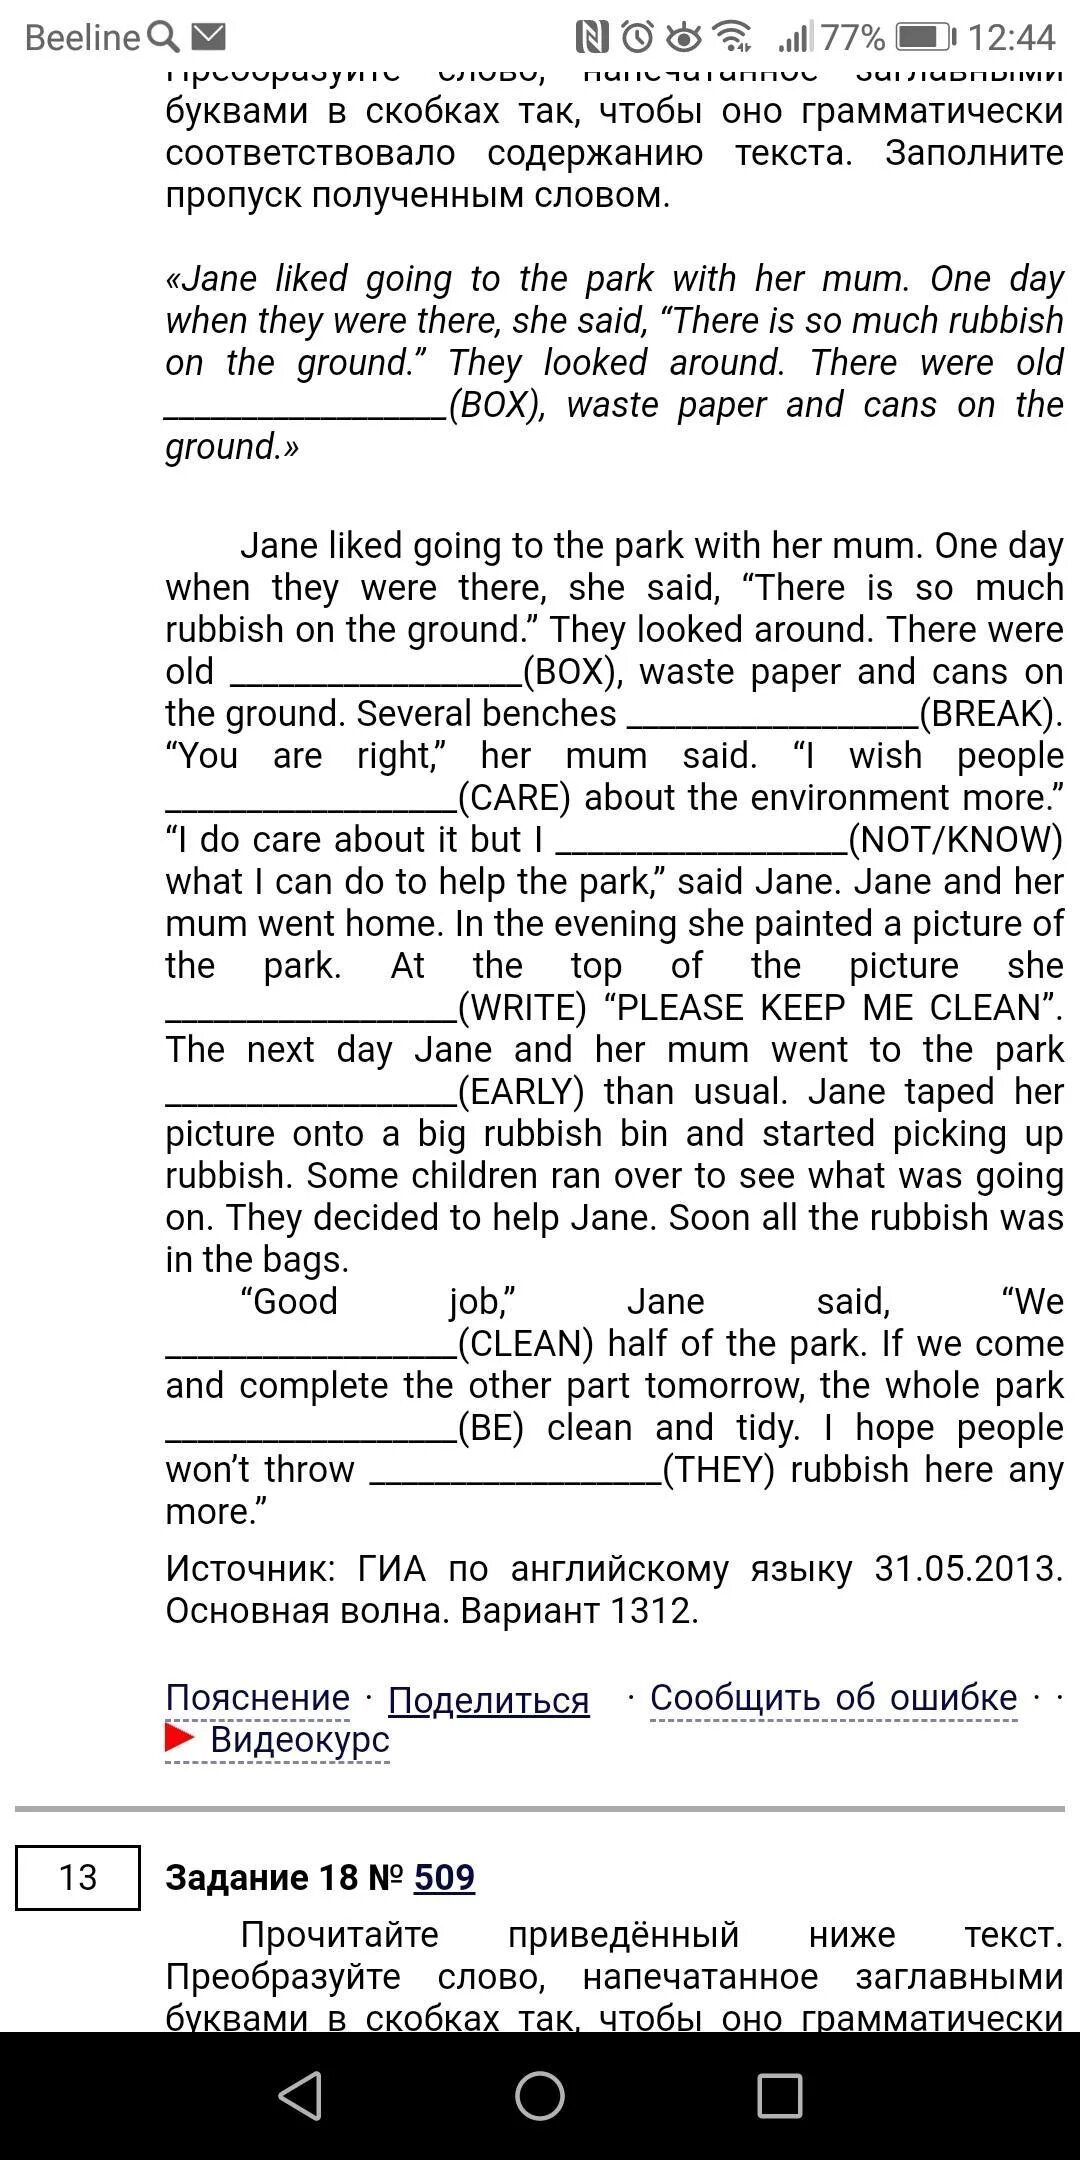 Jane liked going to the Park with her mum. I say mum what